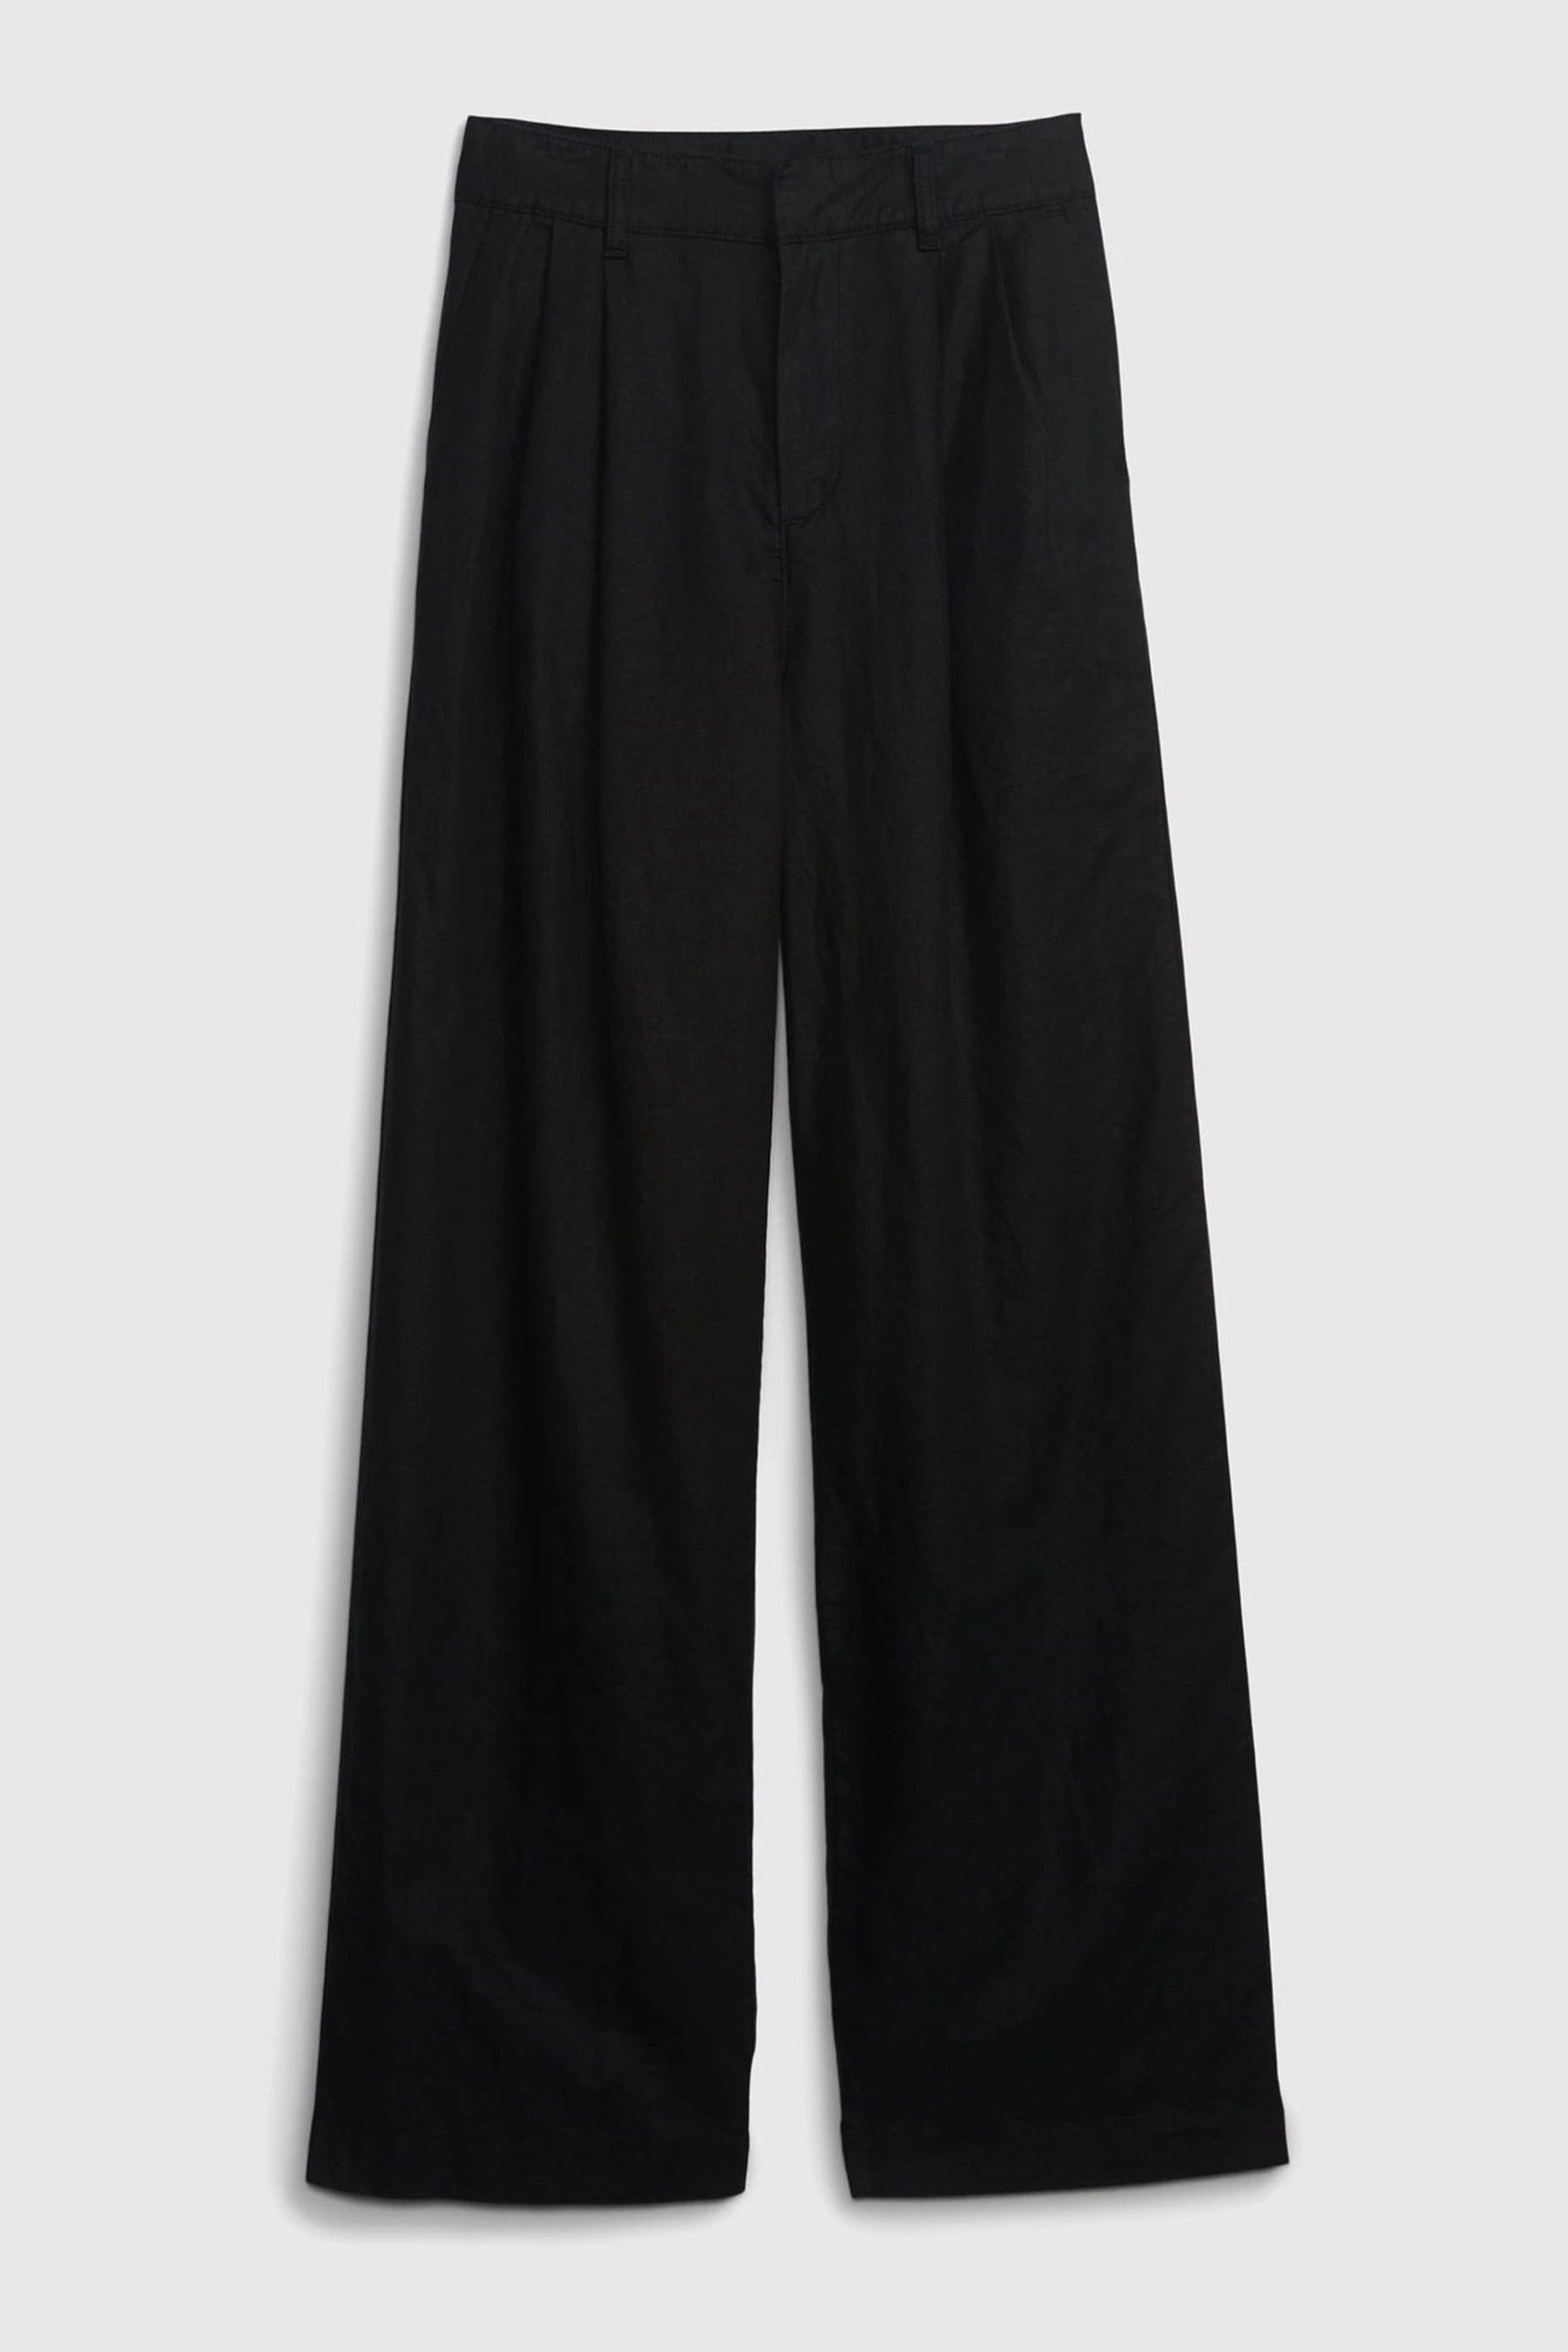 Buy Black Linen Blend Pleated Trousers from the Gap online shop